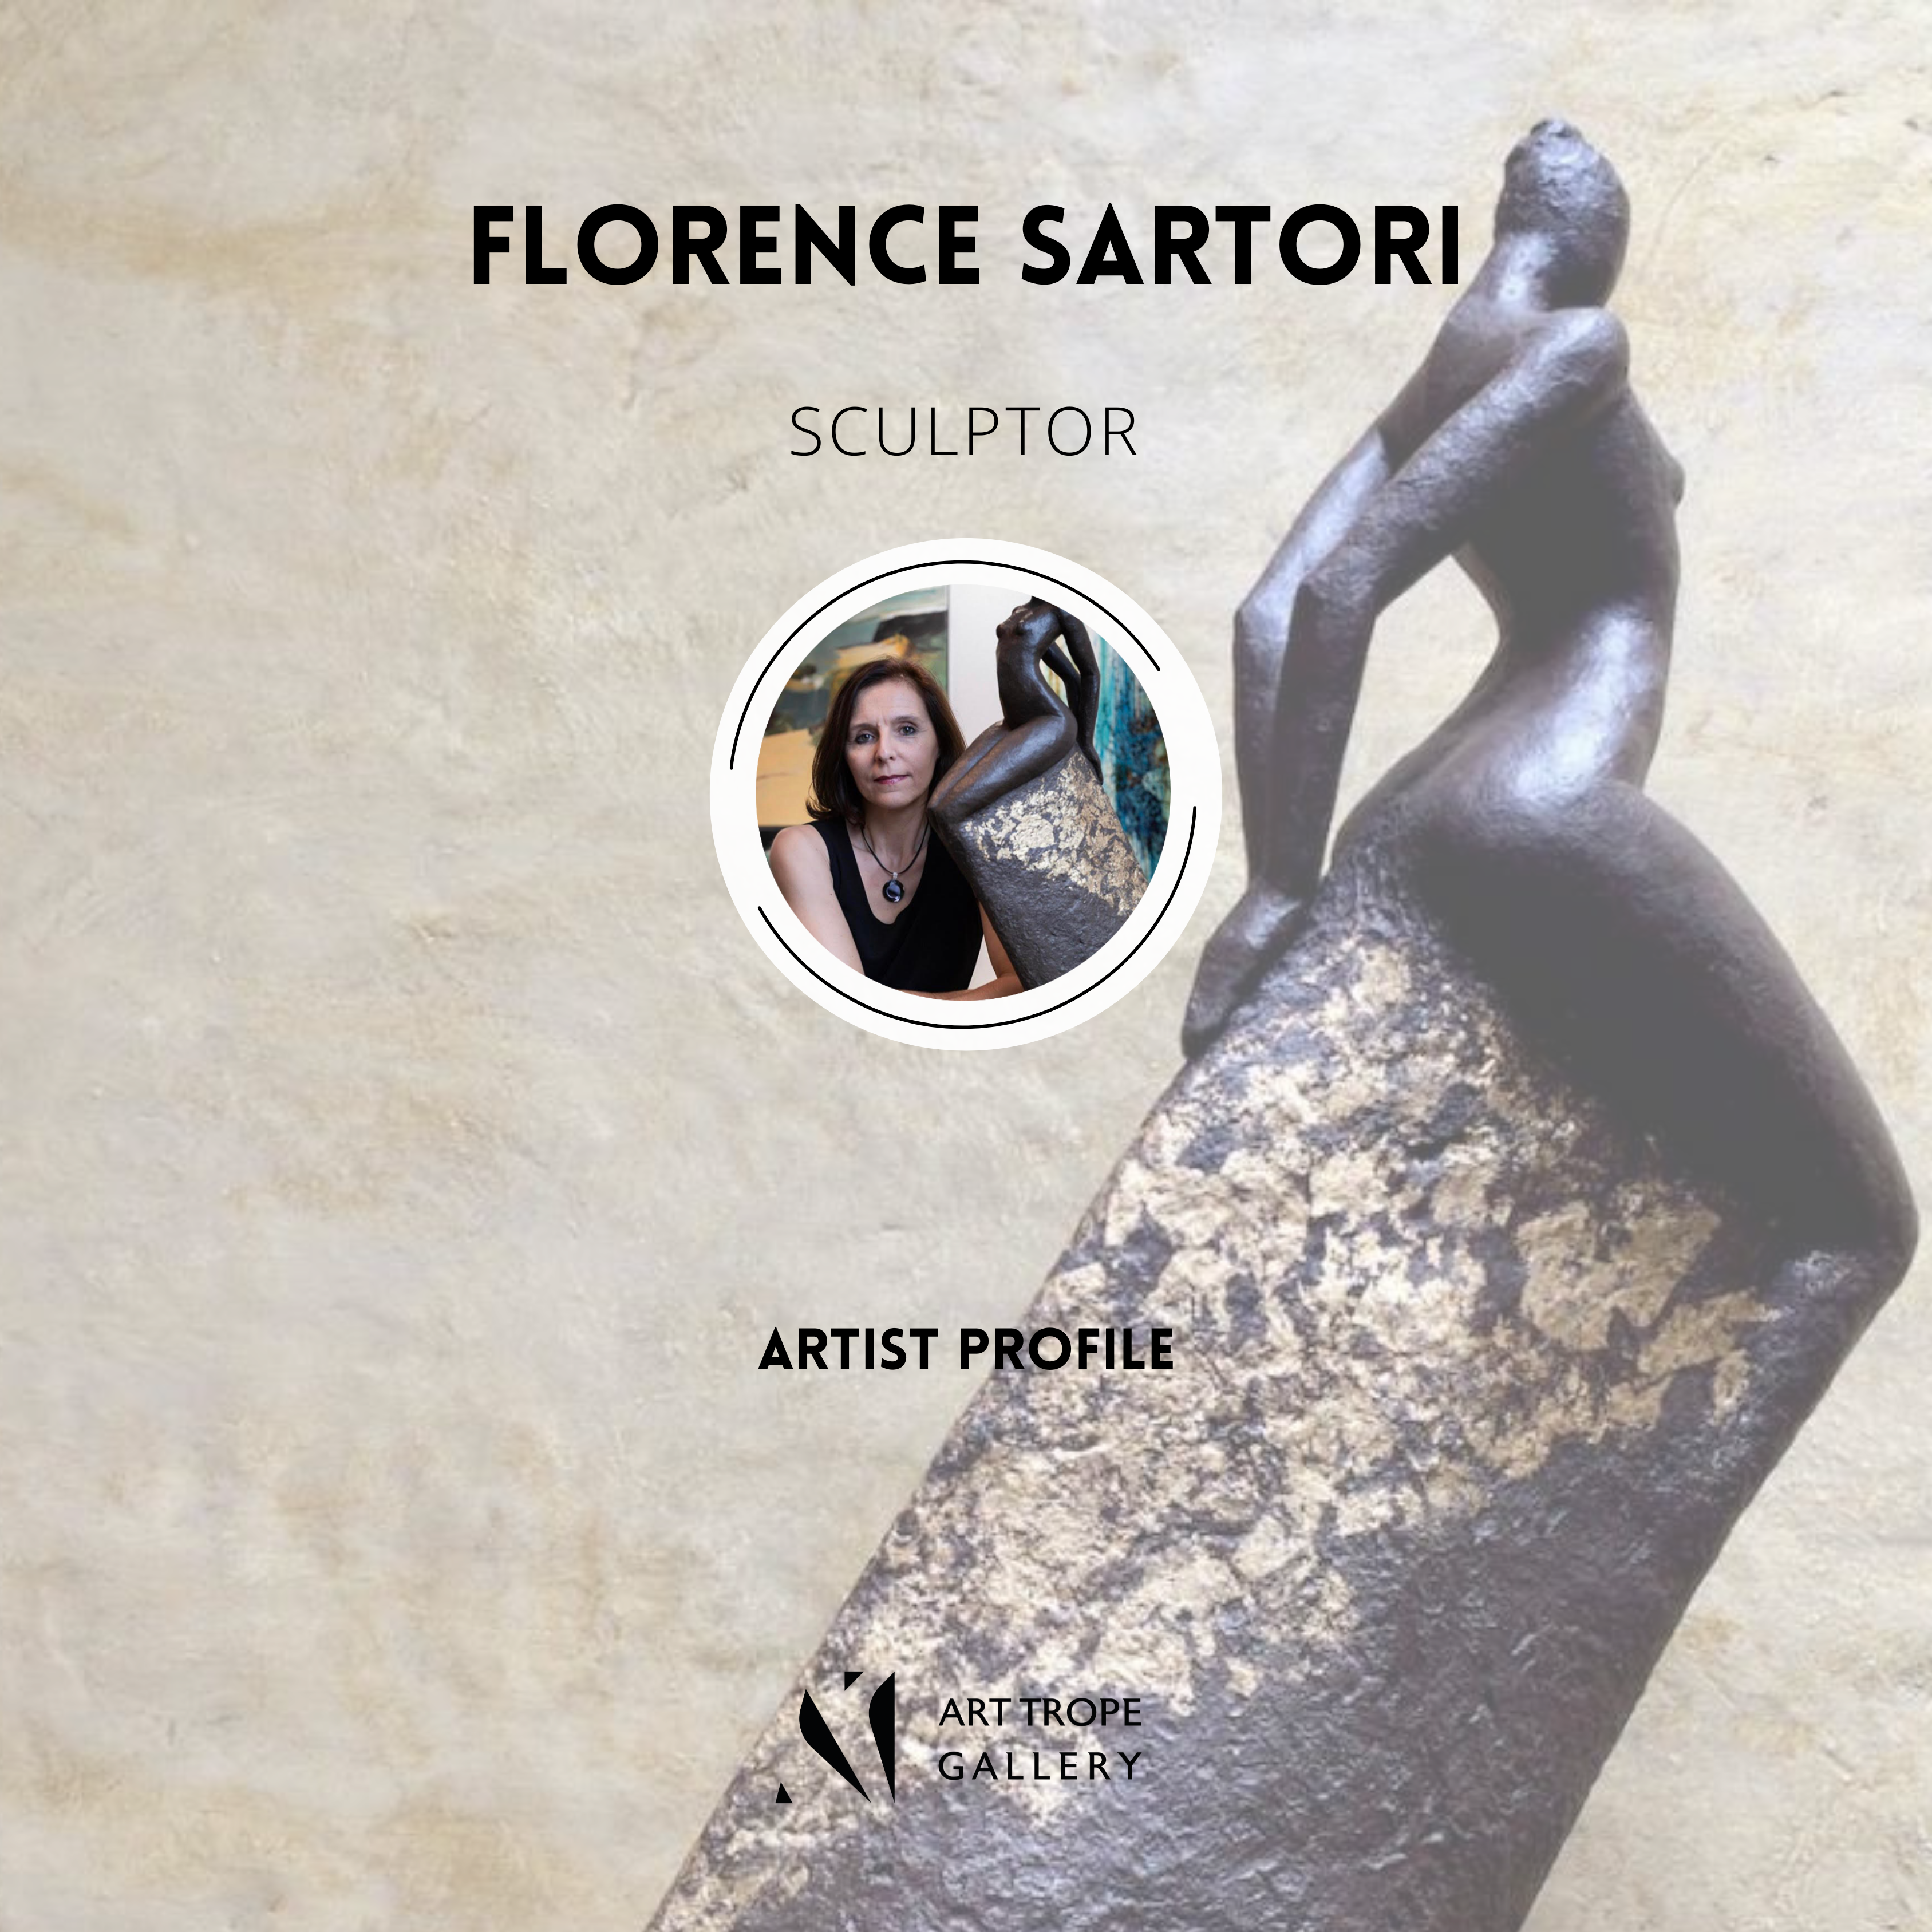 Art Trope Gallery features Sculptor Florence Sartori in a dedicated article!